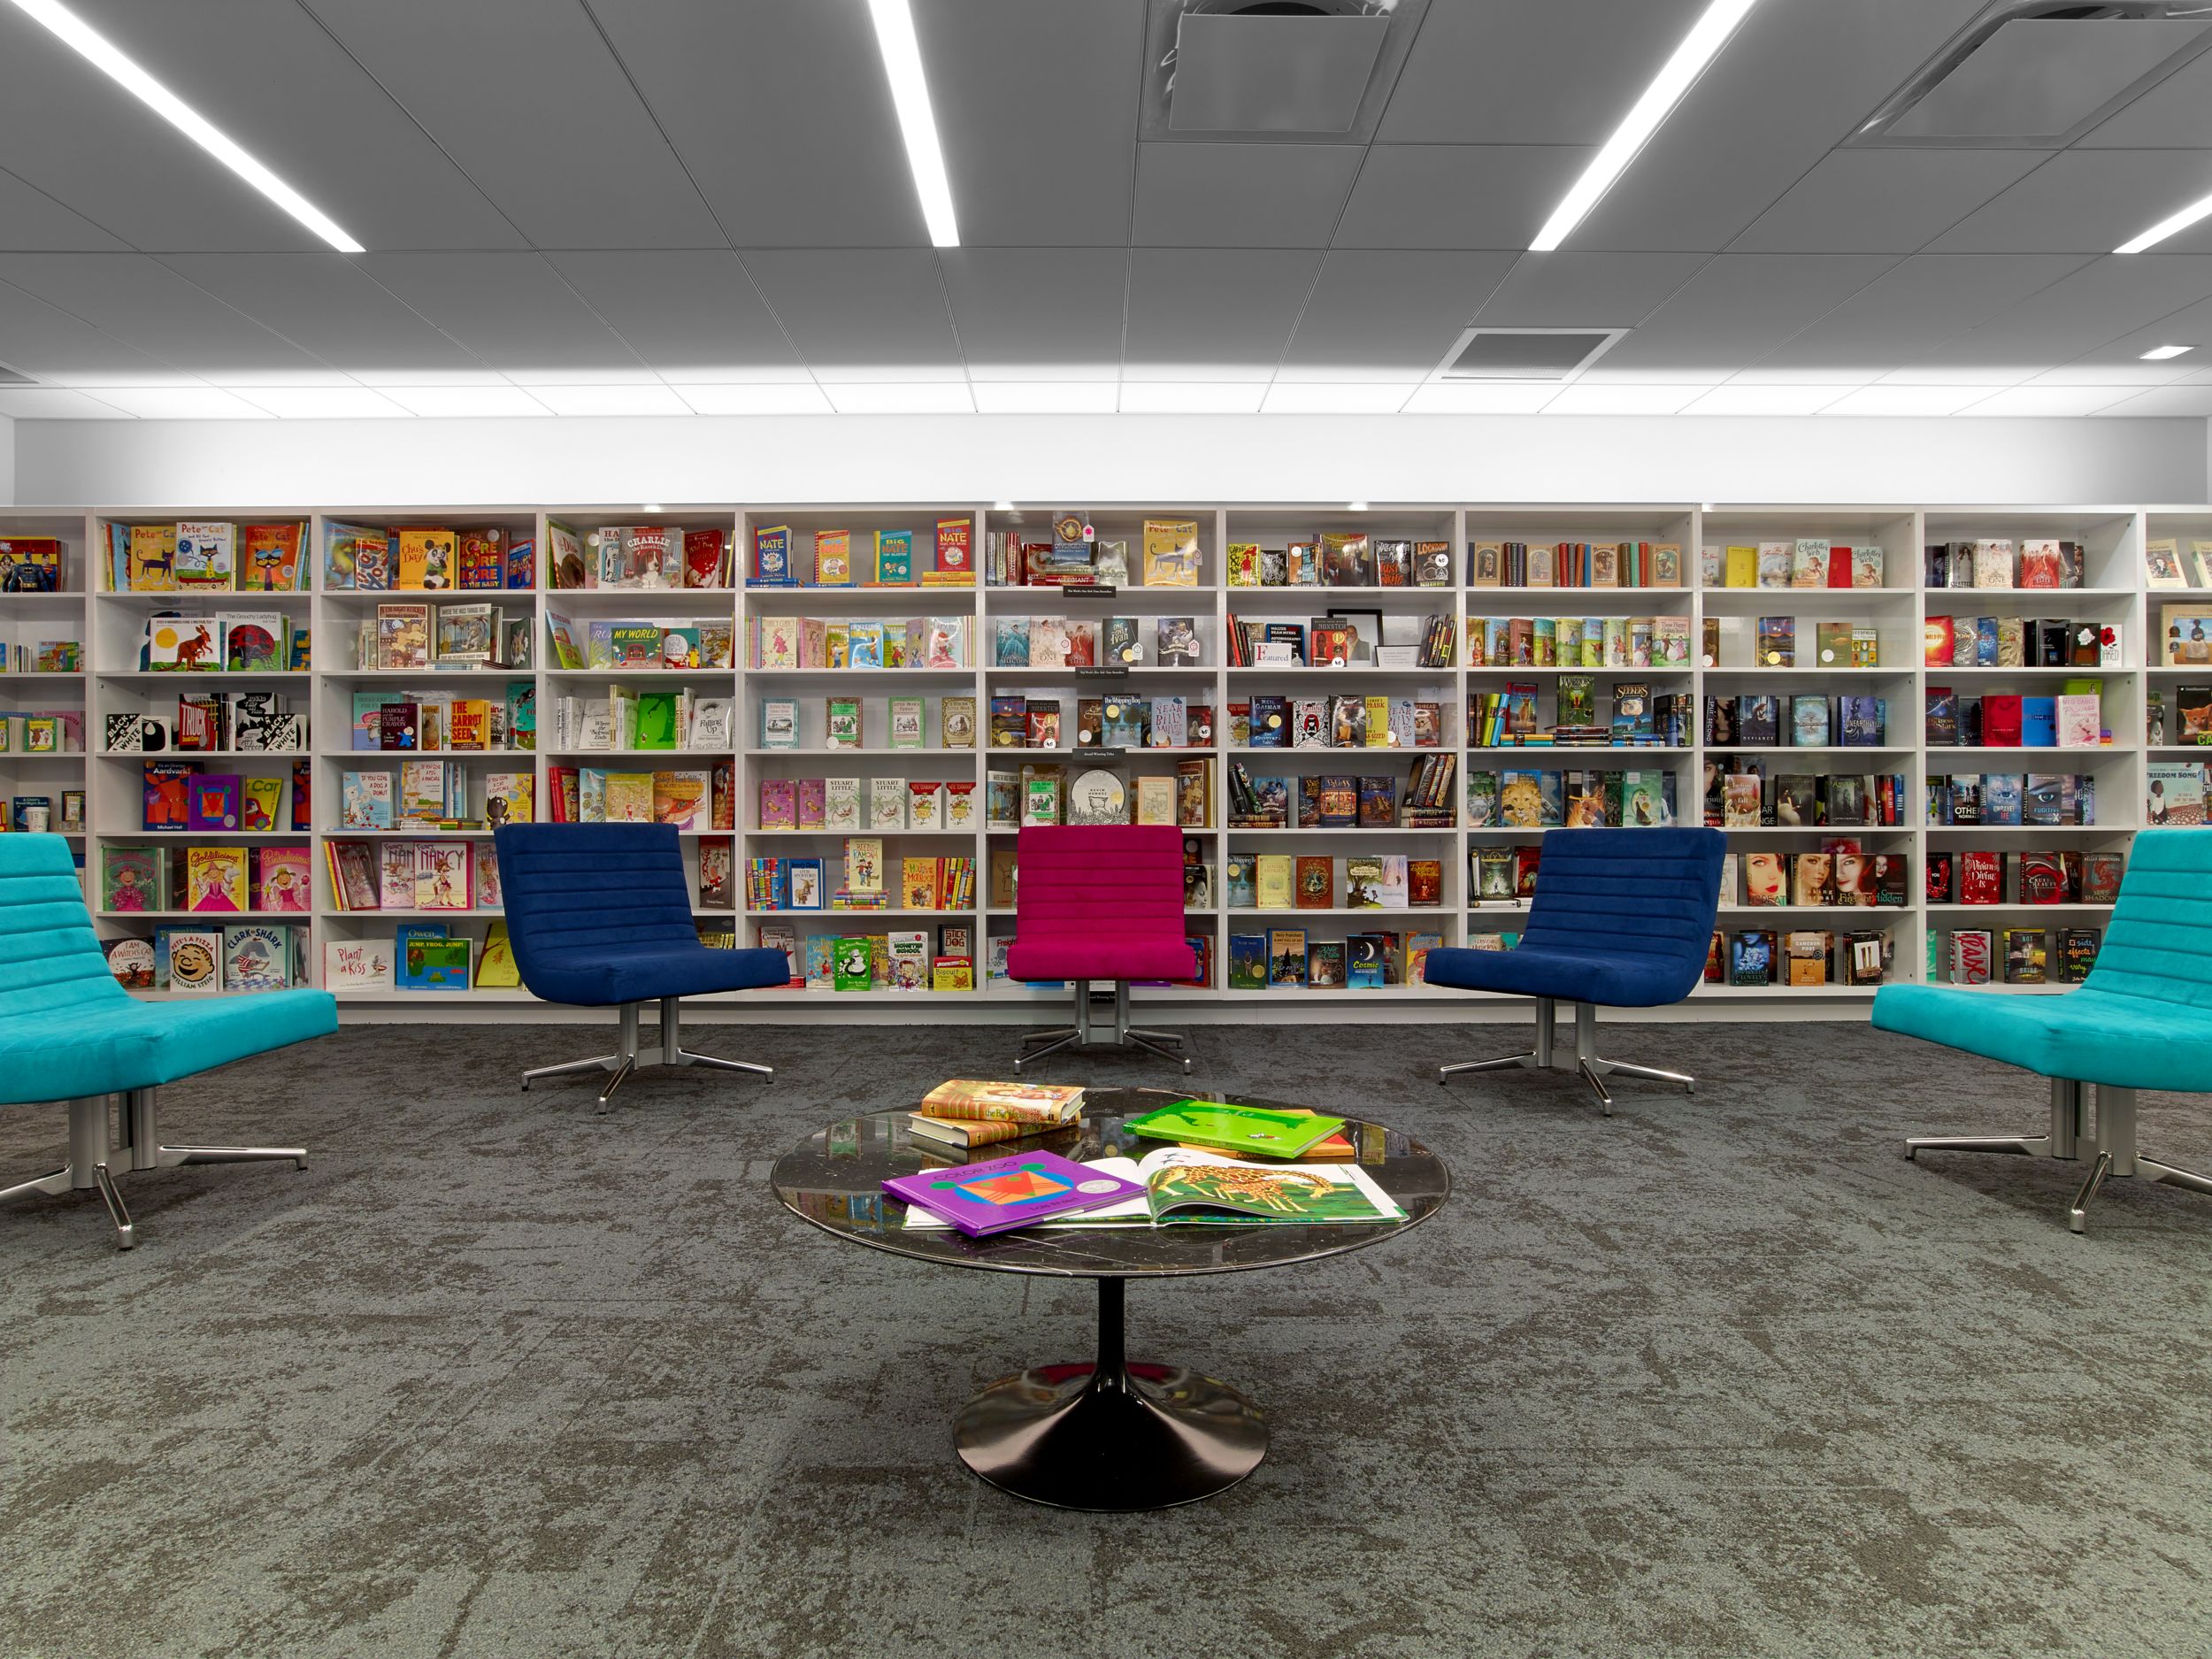 Interface B603 carpet tile in area with bookshelves and colorful chairs imagen número 6